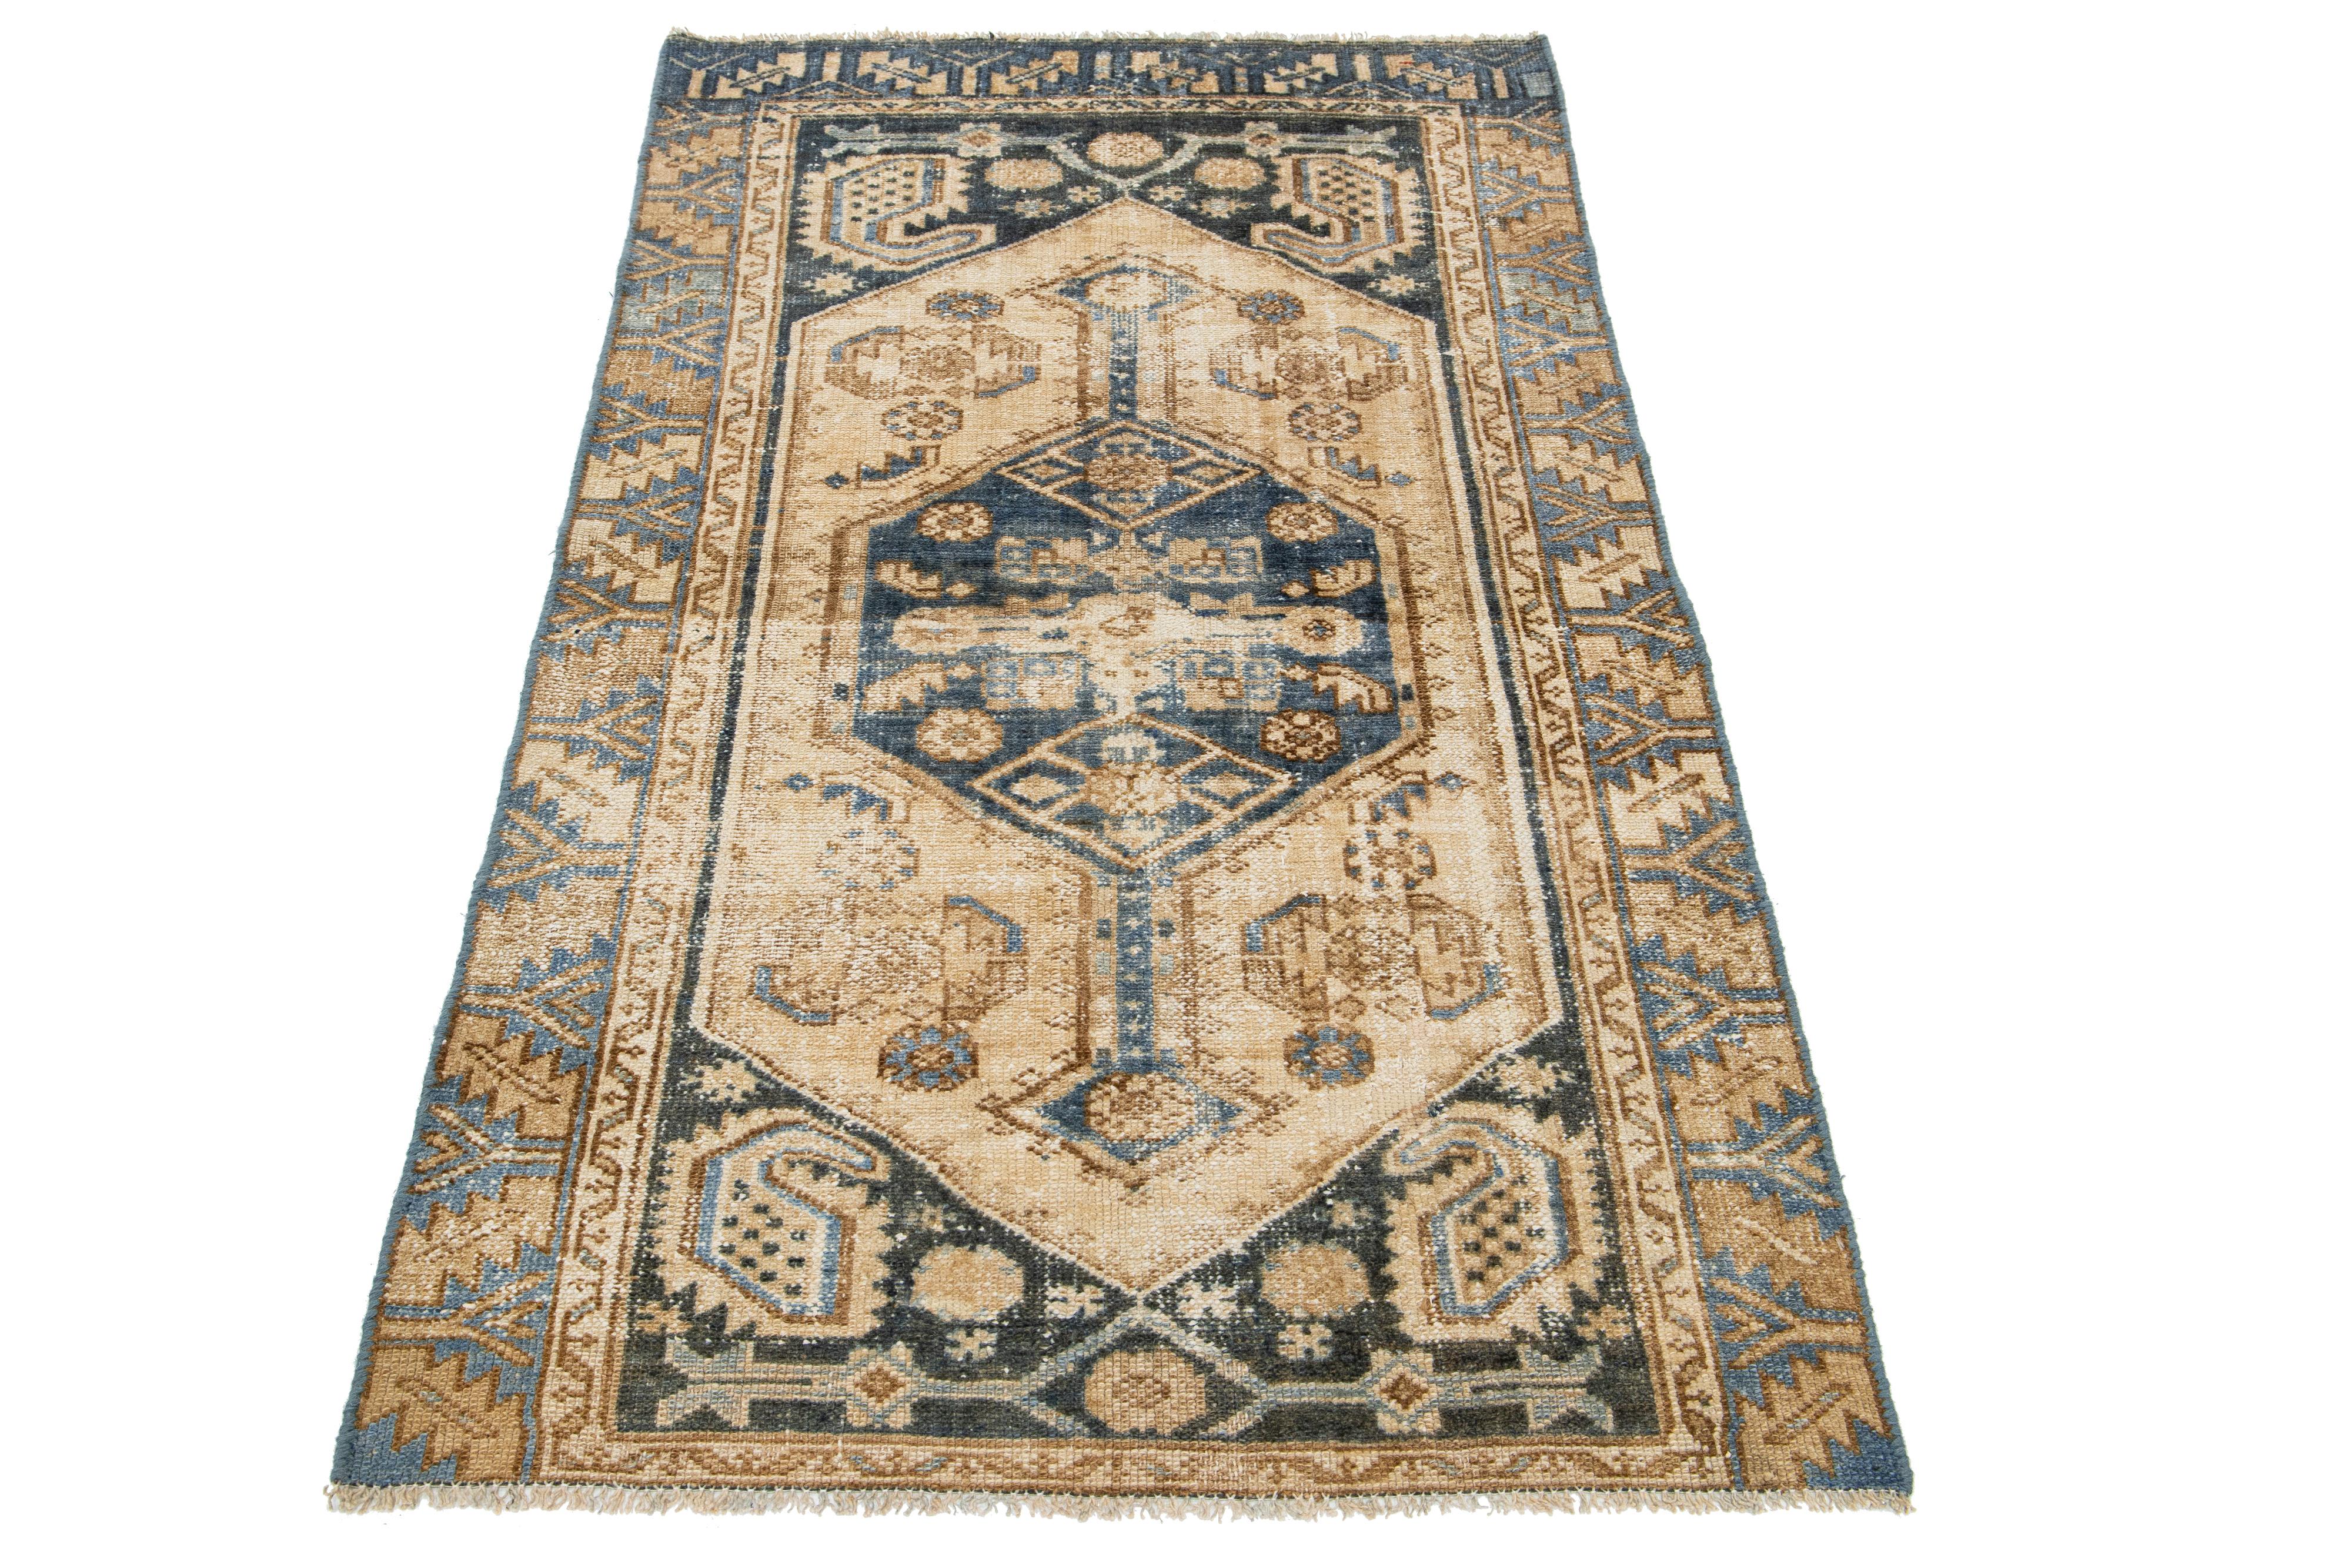 The Antique Hamadan runner is crafted from hand-knotted wool and features a beige field enhanced by a captivating tribal pattern design with blue and brown accents.

This rug measures 3'3